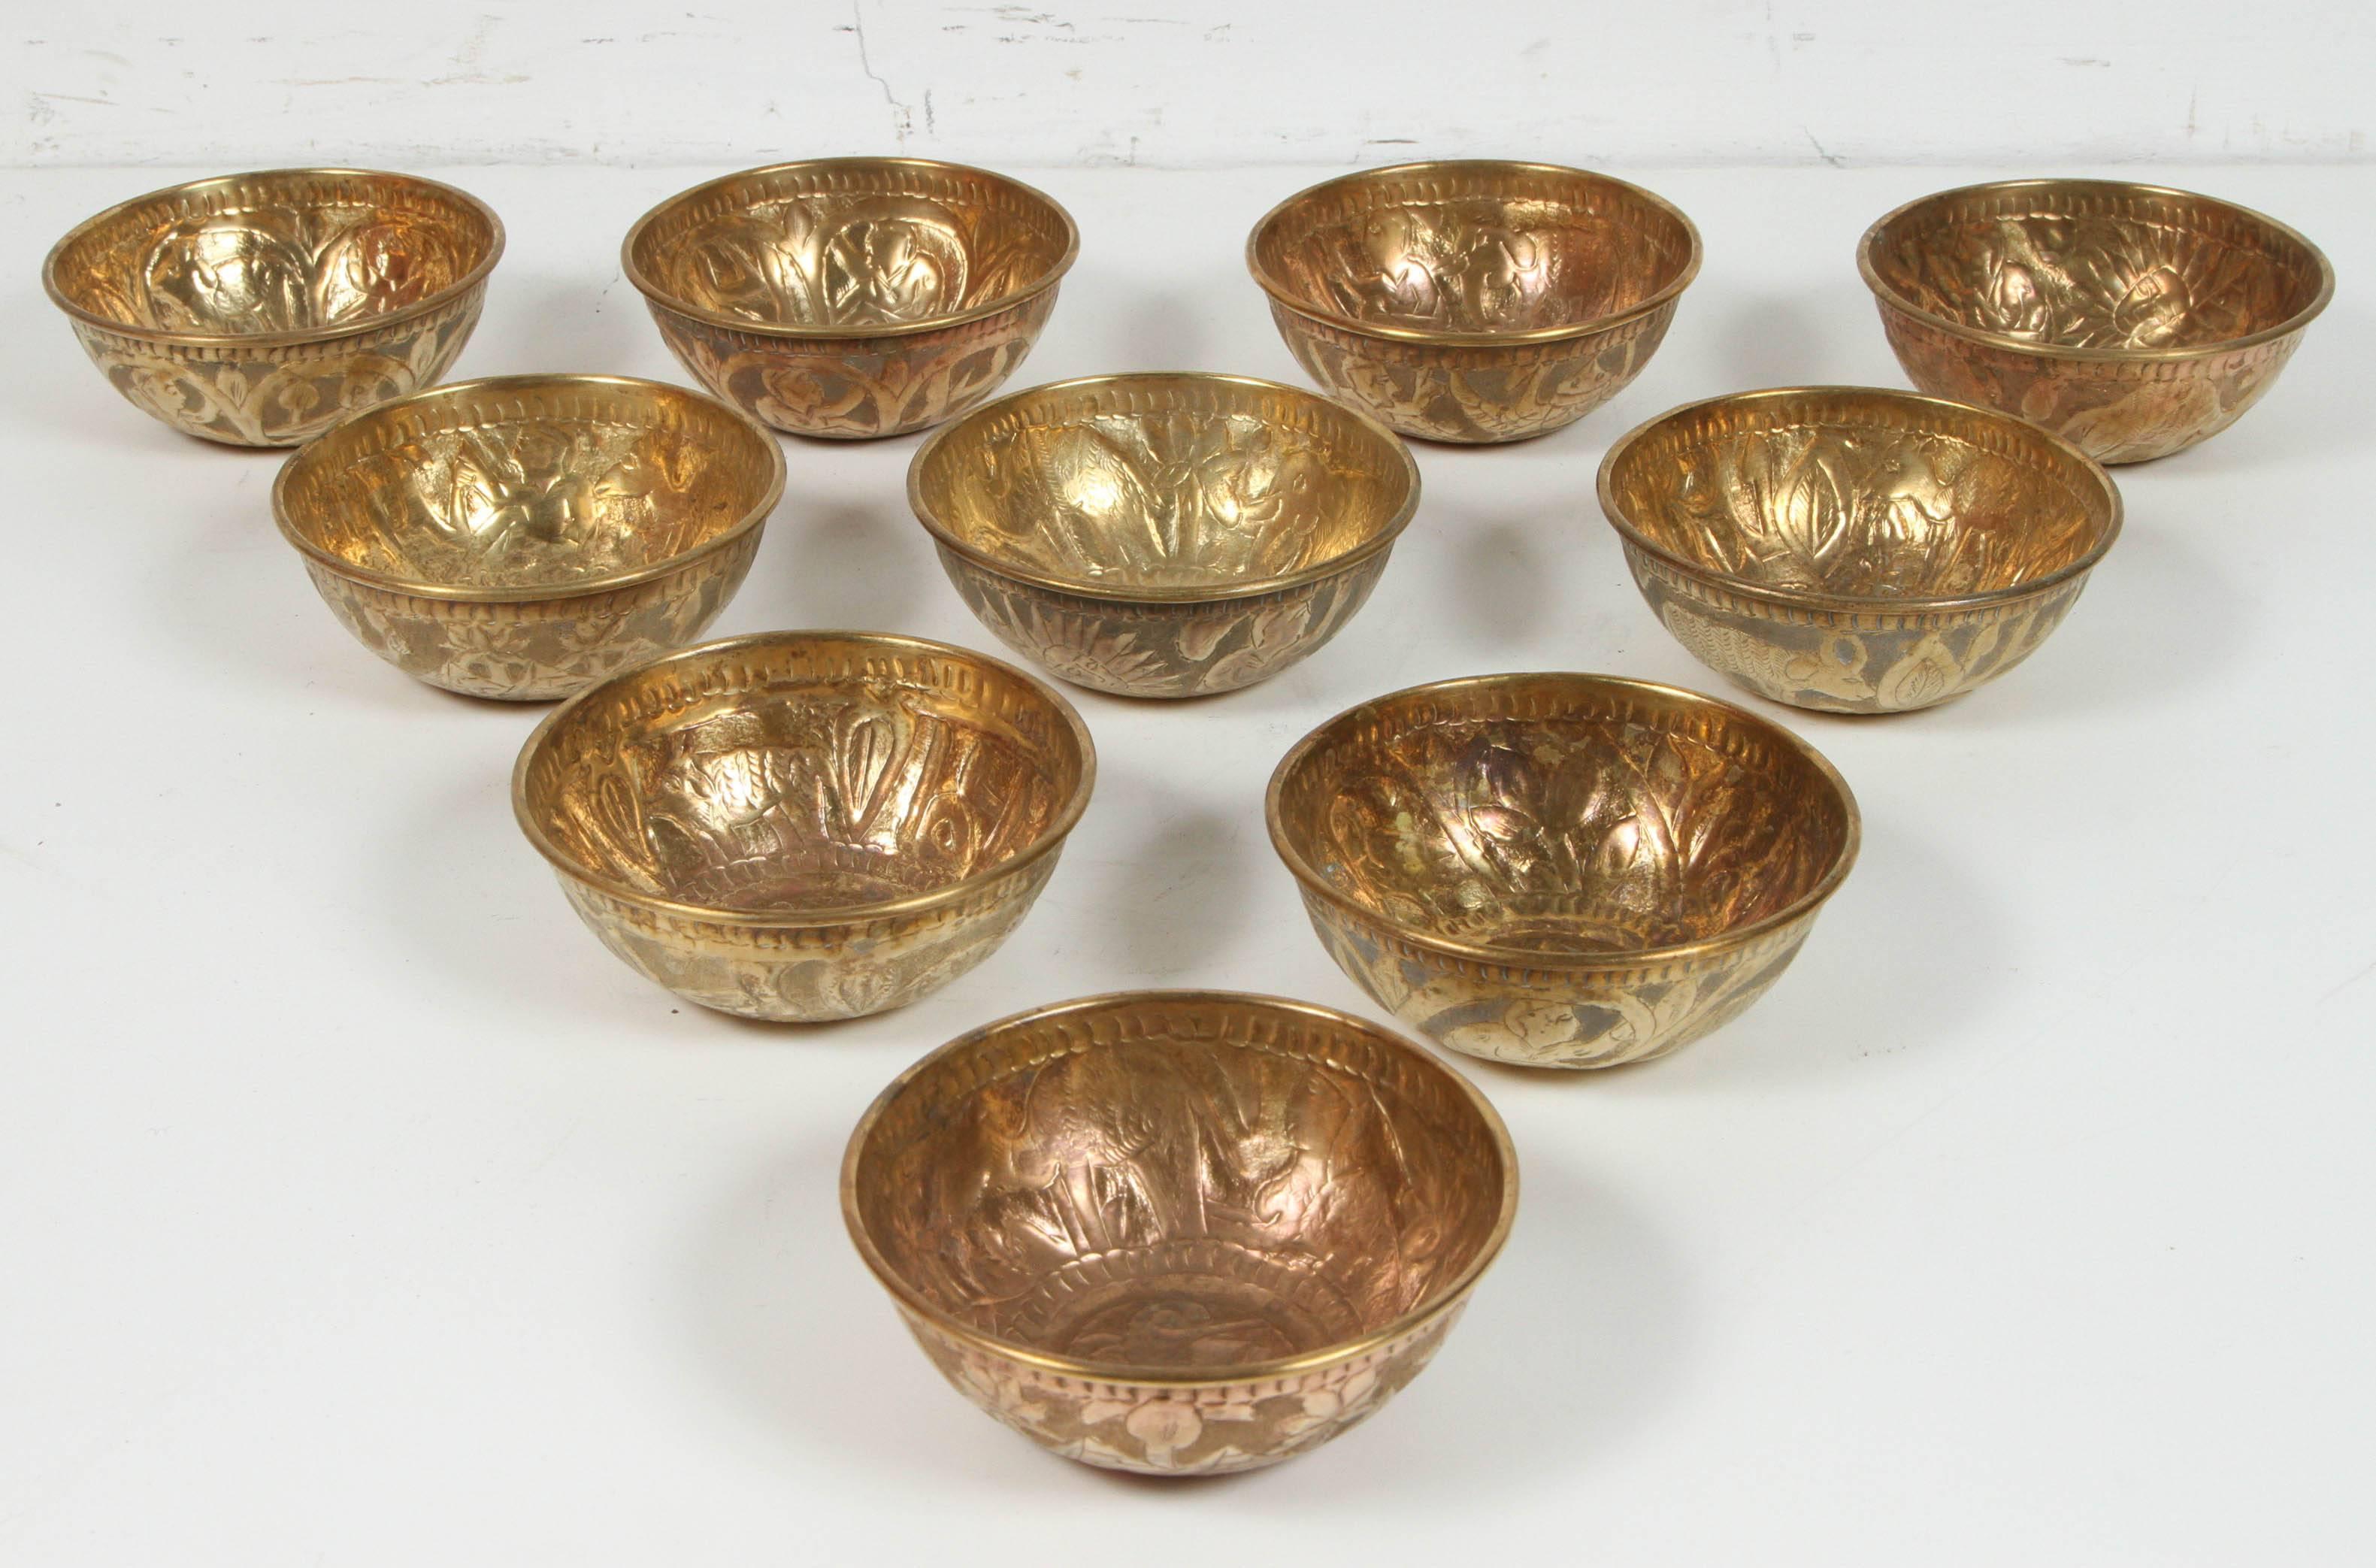 Set of ten antique Middle Eastern brass magic bowls.
Nicely handcrafted and hand-hammered with Moorish floral designs and animal figures.
Each one is one of a kind with a unique hammered and repousse design.
Very nice patina for this set of